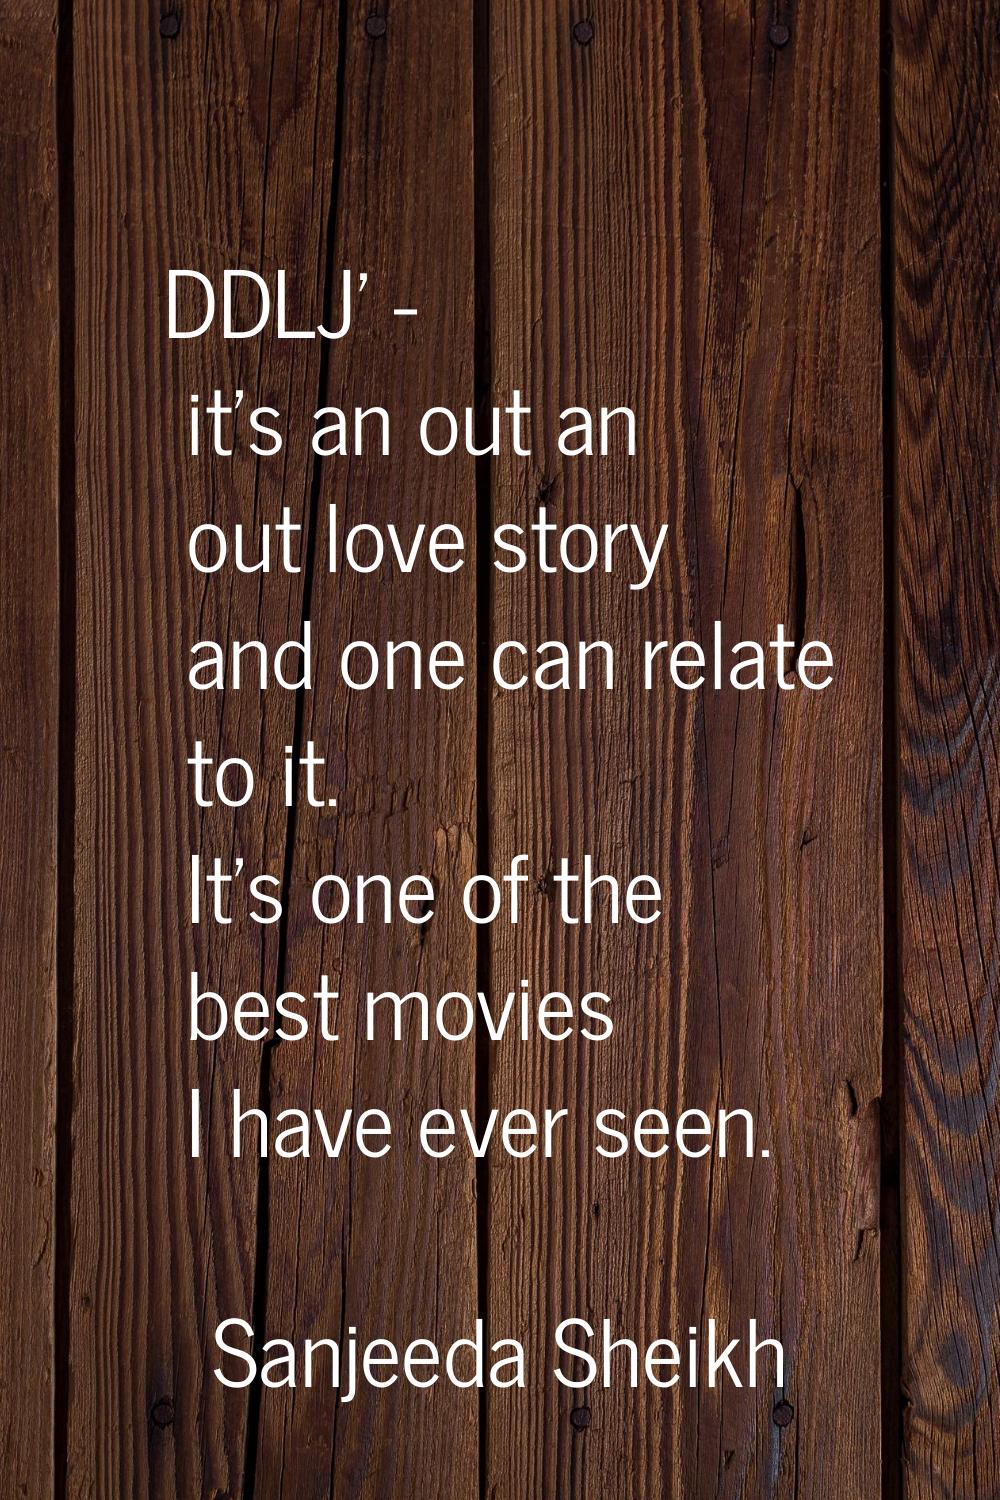 DDLJ' - it's an out an out love story and one can relate to it. It's one of the best movies I have 